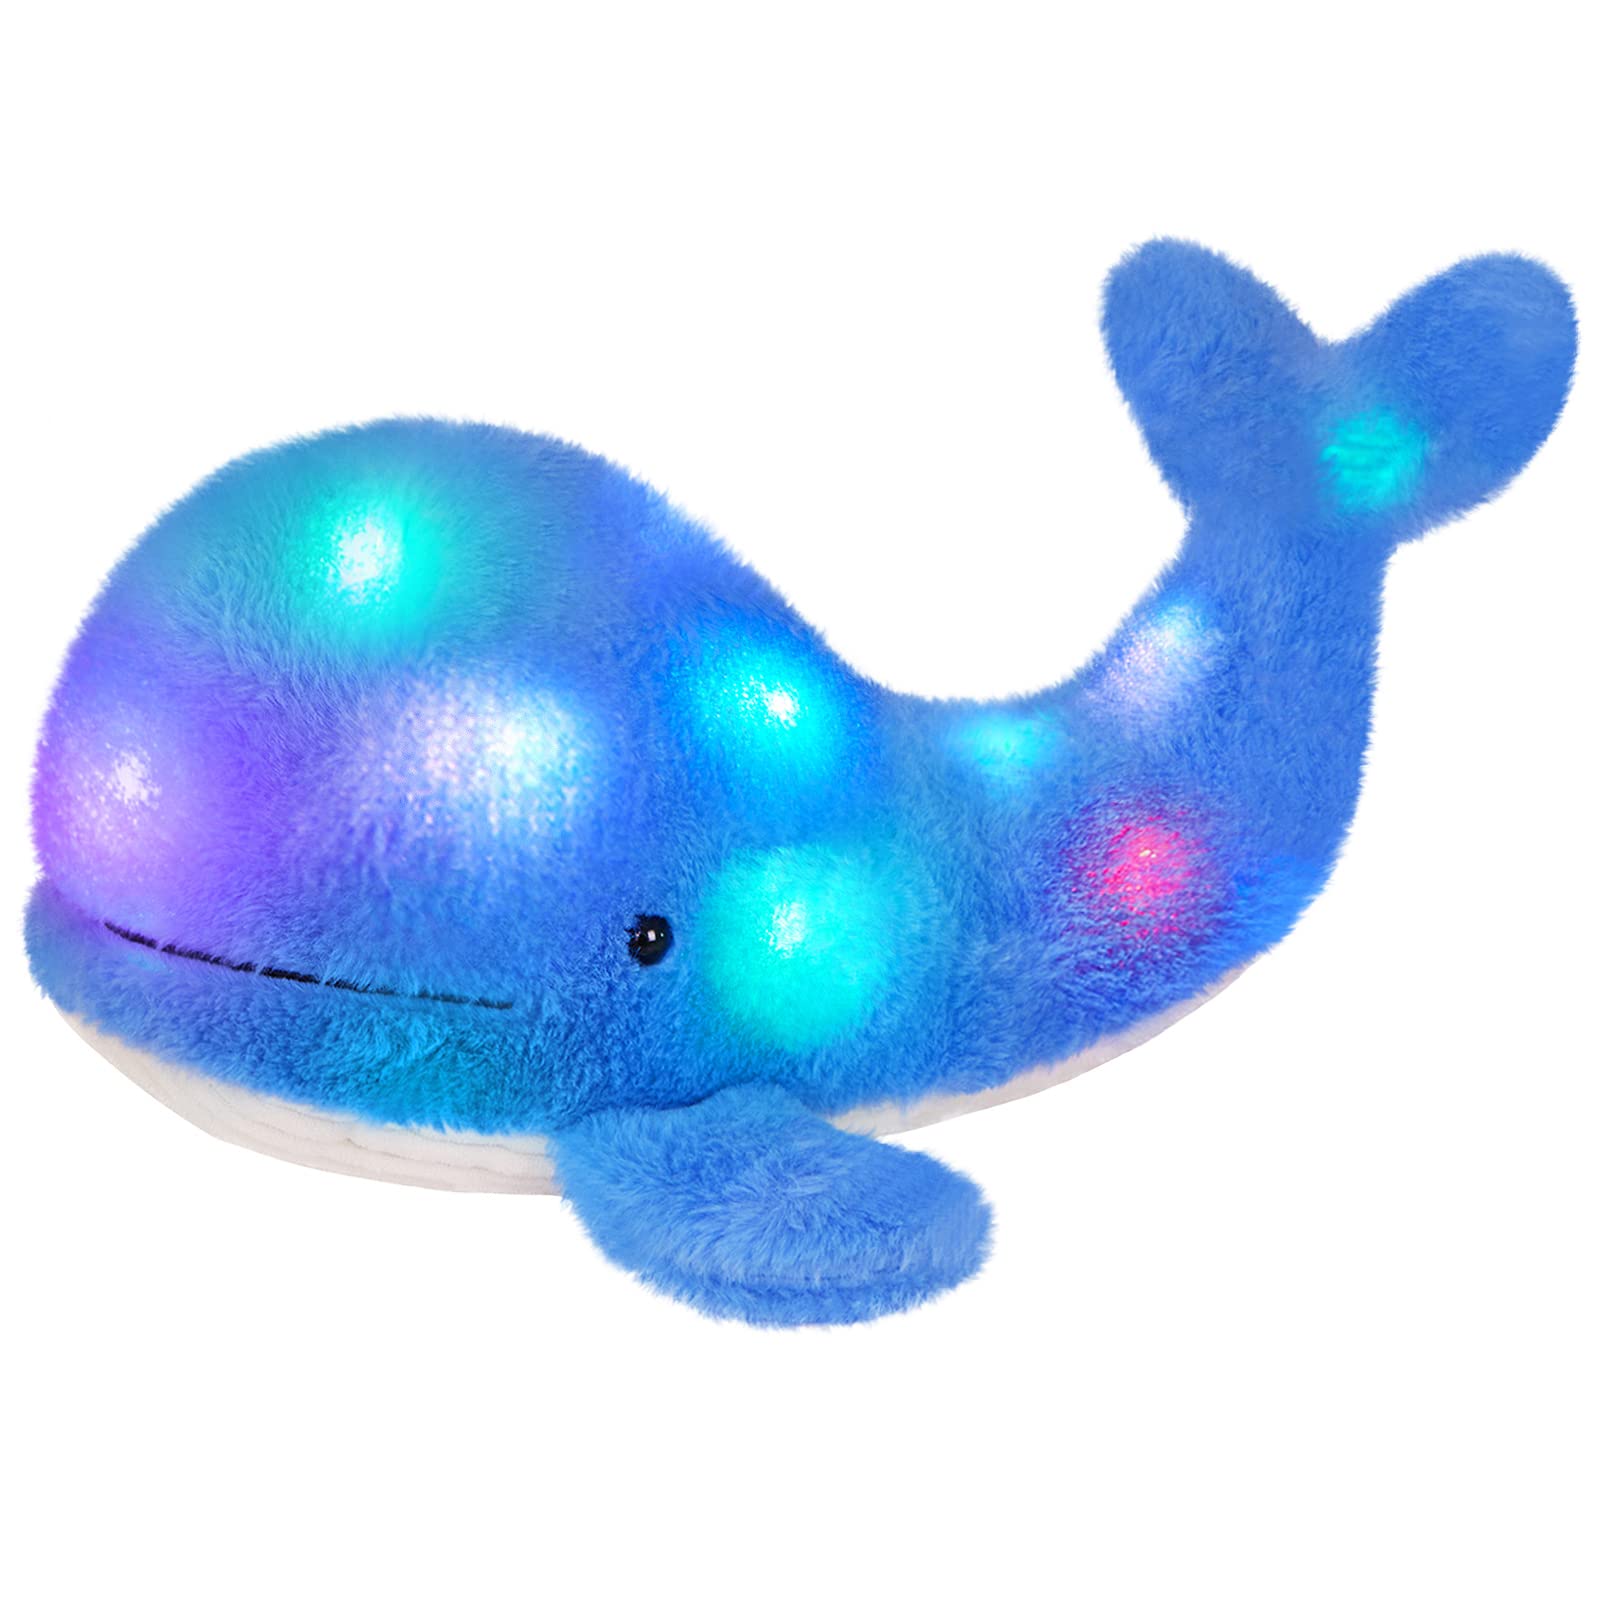 Ocean Plush Toy Gift For Kids Toddlers